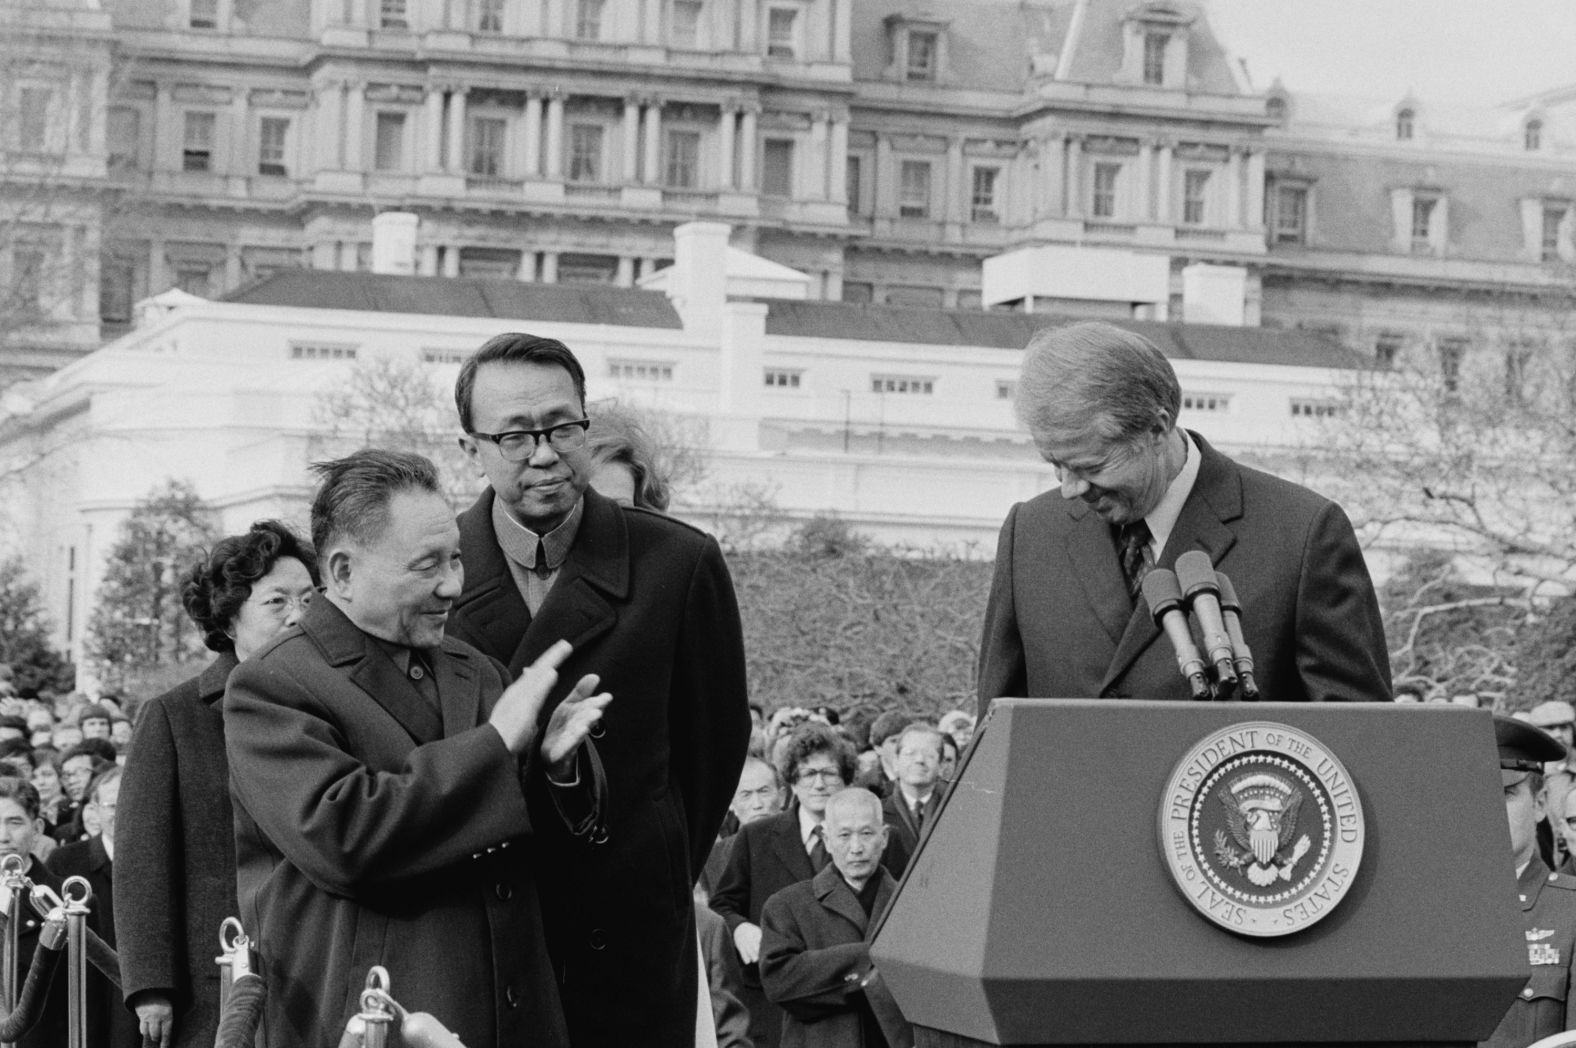 Deng applauds as US President Jimmy Carter stands behind a podium at the White House in 1979. The US officially recognized the People's Republic of China and established diplomatic relations on January 1 of that year.